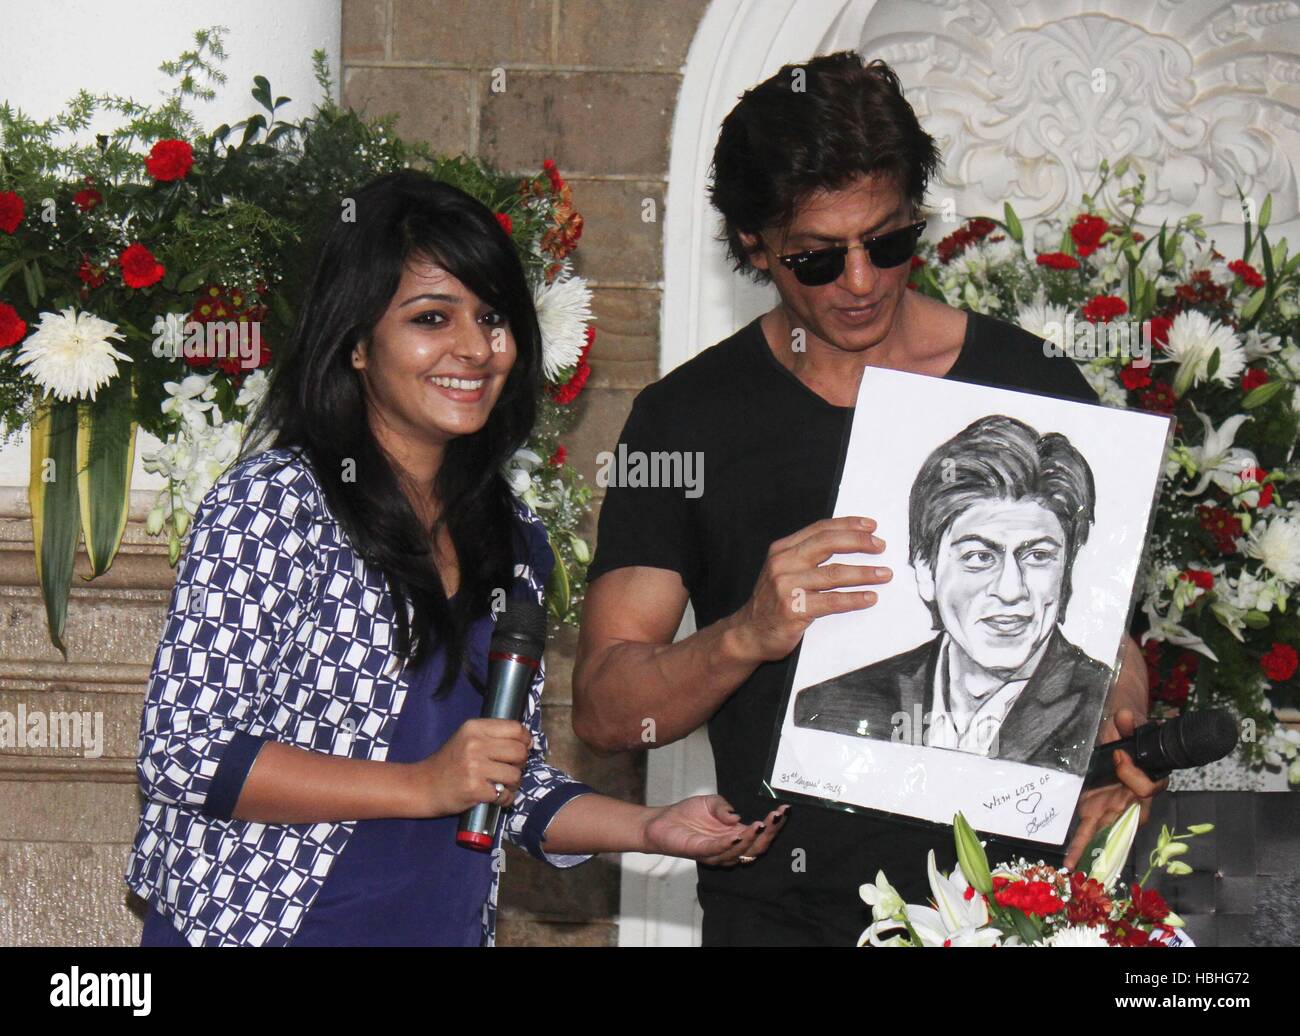 The Baadshah of Bollywood: Shah Rukh Khan | Celebrity art drawings,  Celebrity portraits drawing, Celebrity drawings